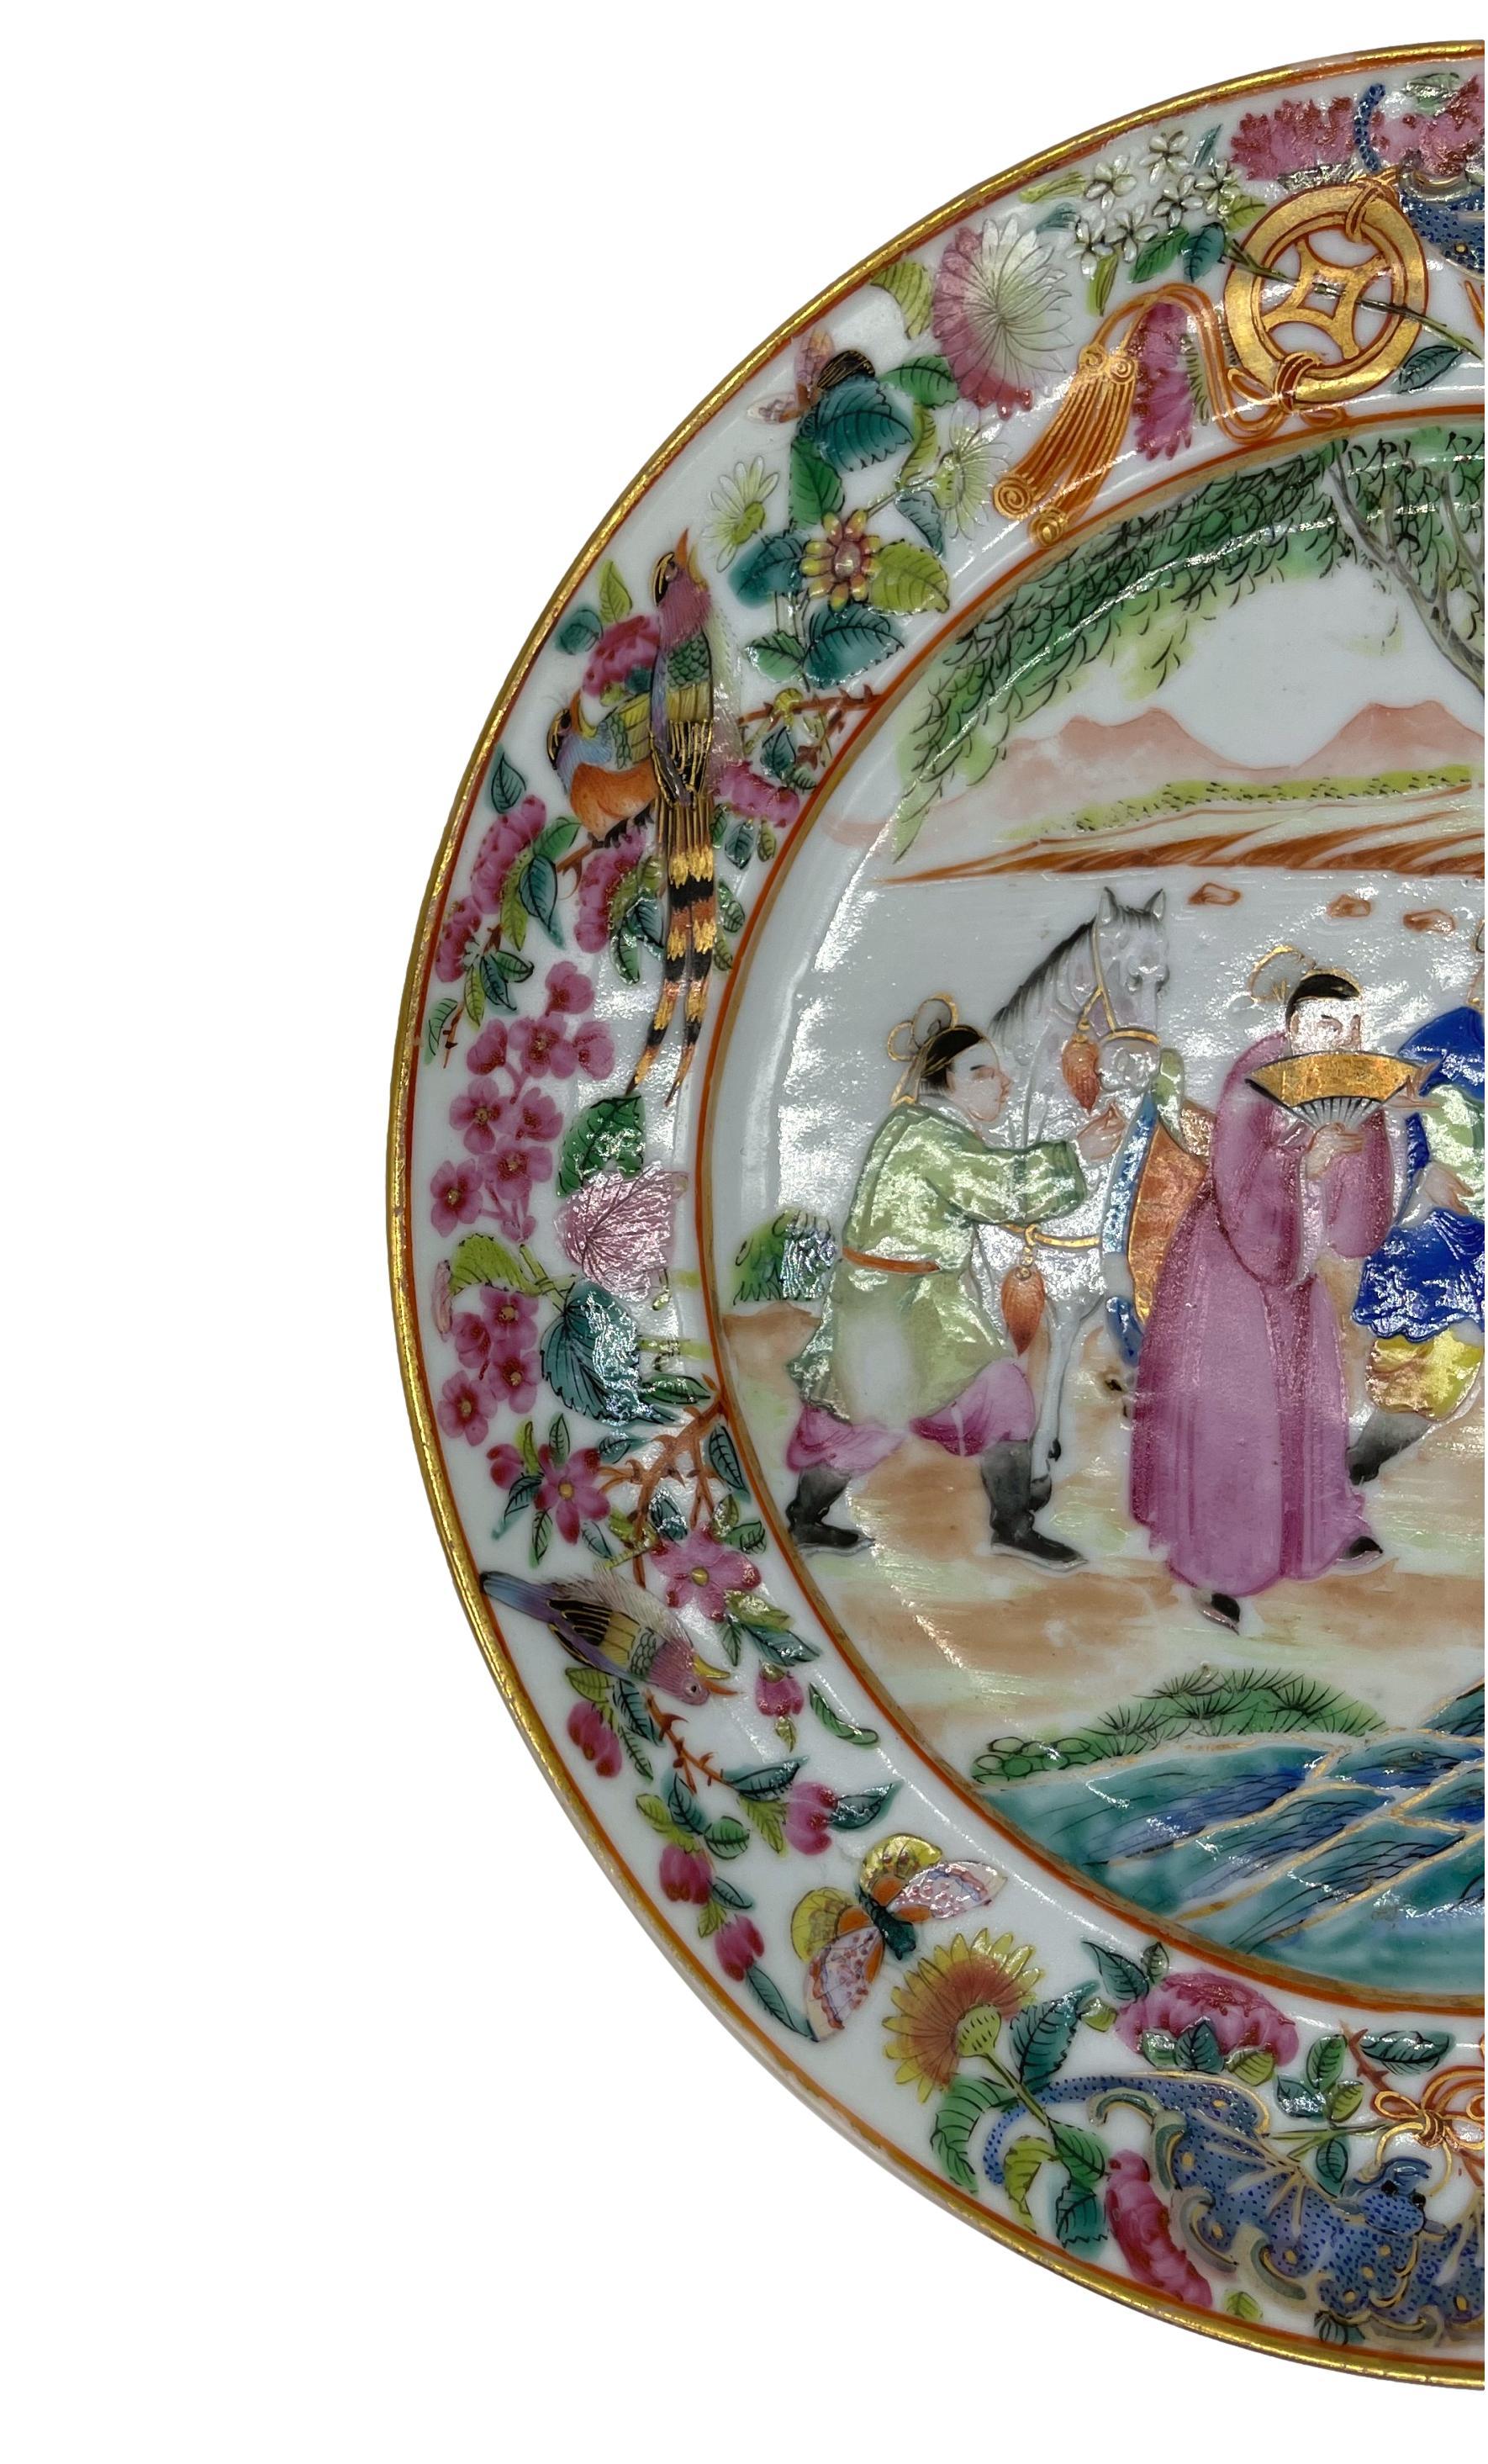 Chinese Export Porcelain Rose Mandarin plate, ca. 1840, with a central design depicting a pavilion court scene with five figures, with hyper-vivid enamels and fine gilt accents, with multi-layered raised enamels, with blue Taihu stones to the